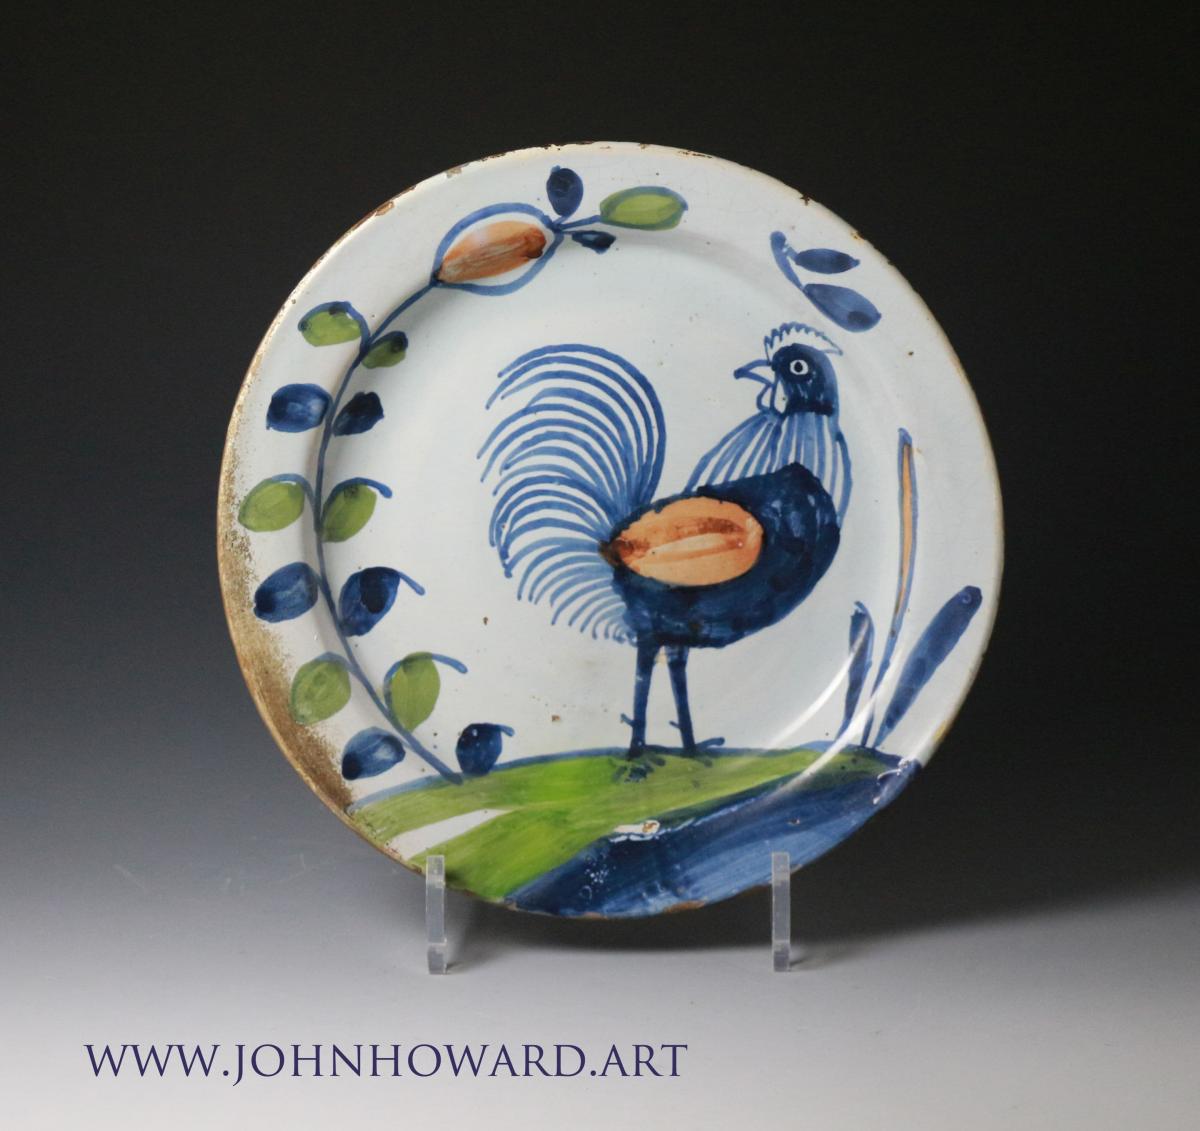 English delftware pottery plate with image of a rooster antique period circa 1725 period